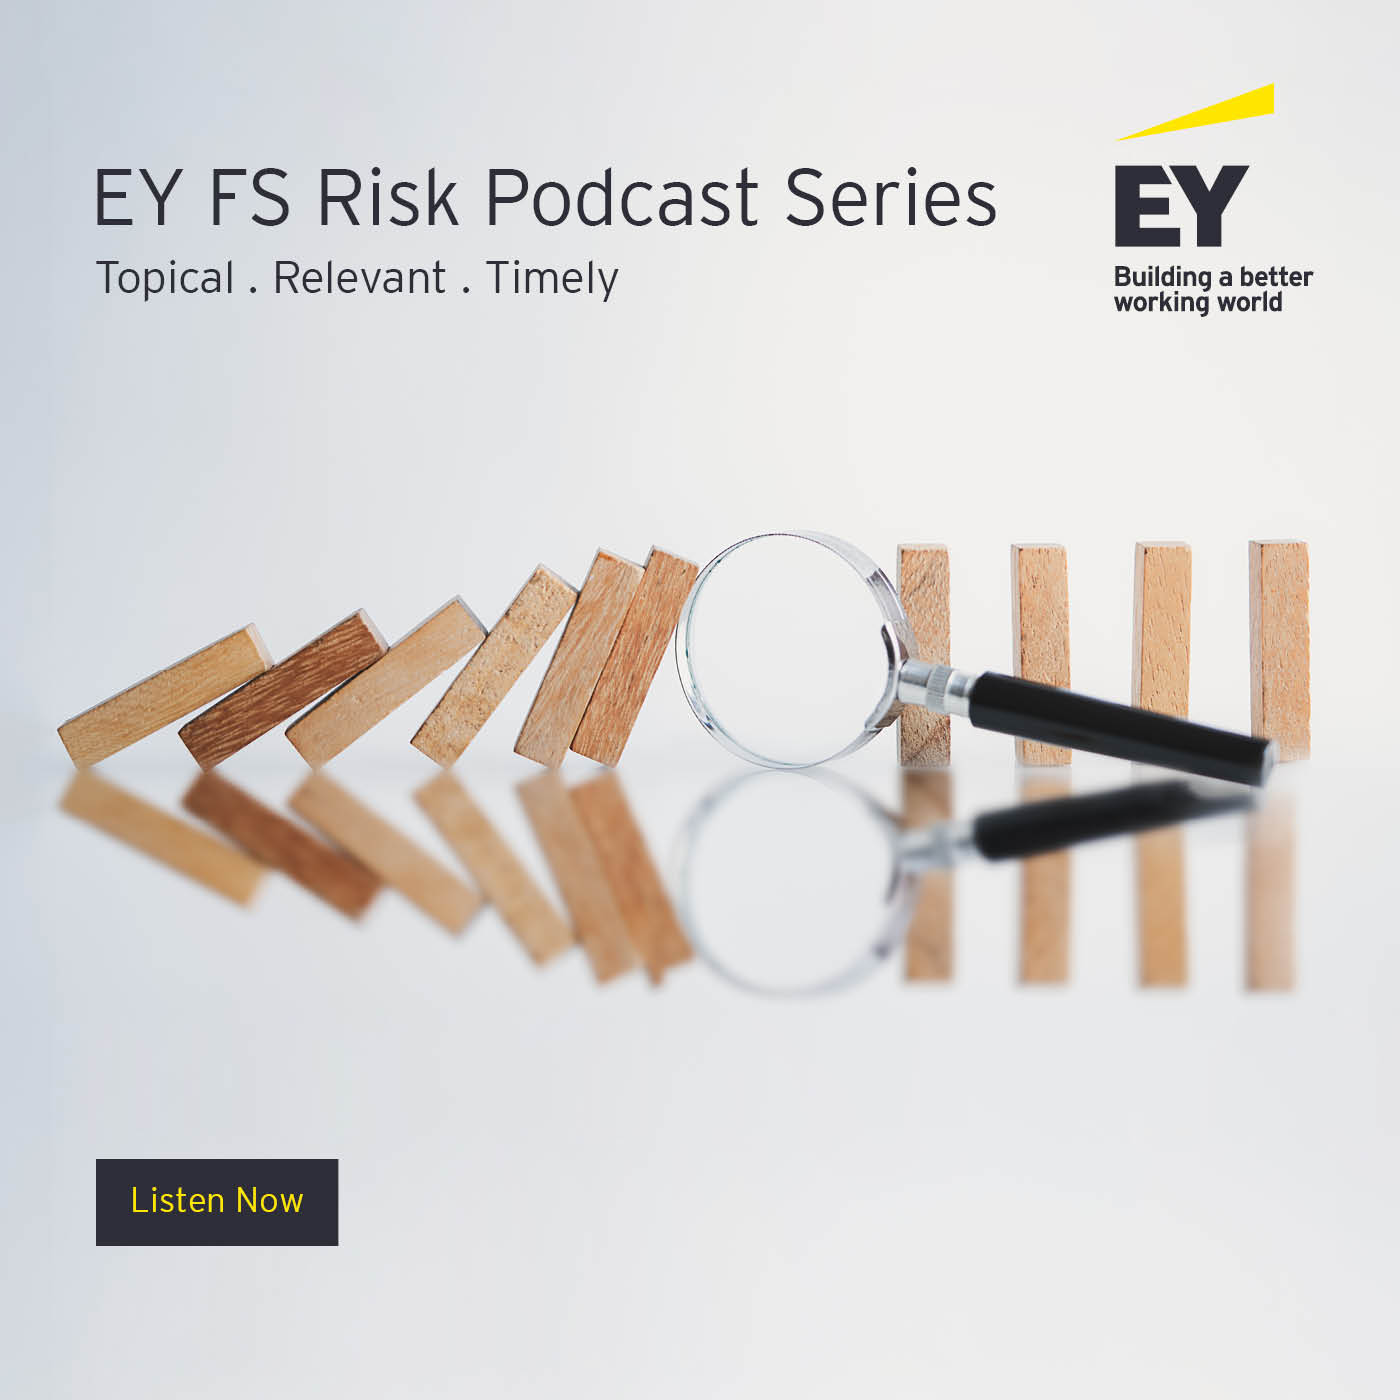 EY FS Risk Podcast Series